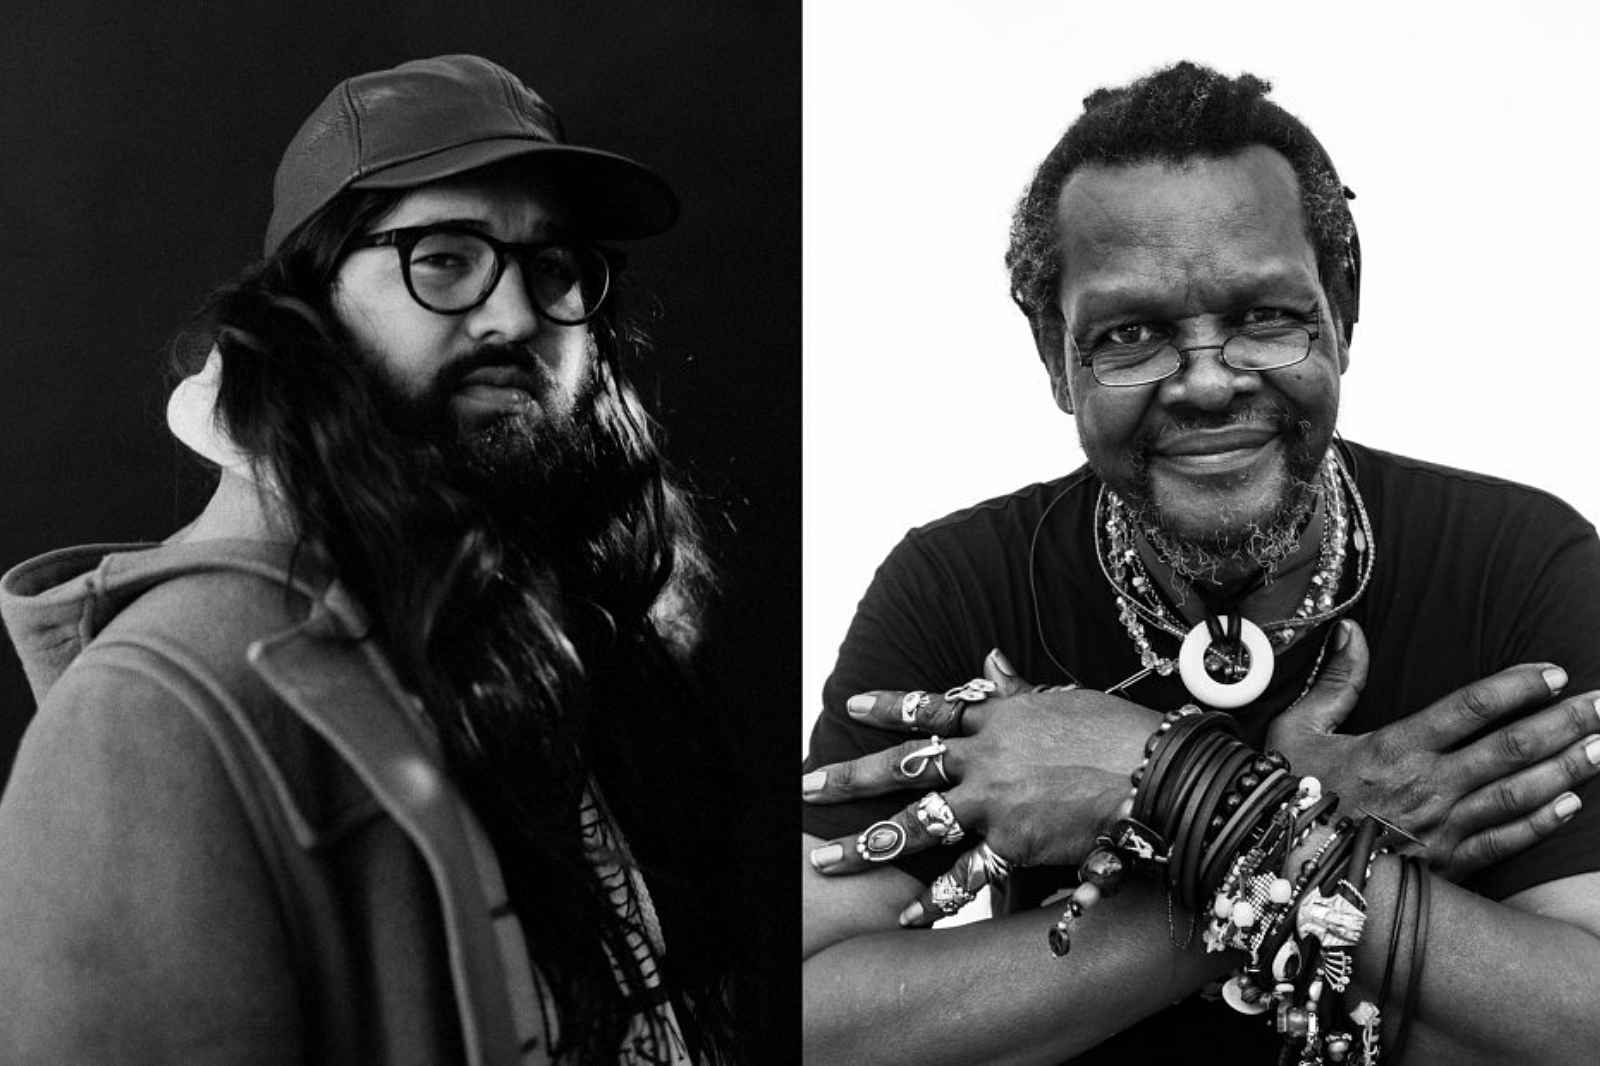 Matthew E. White and Lonnie Holley share new track 'I’m Not Tripping/Composition 8'